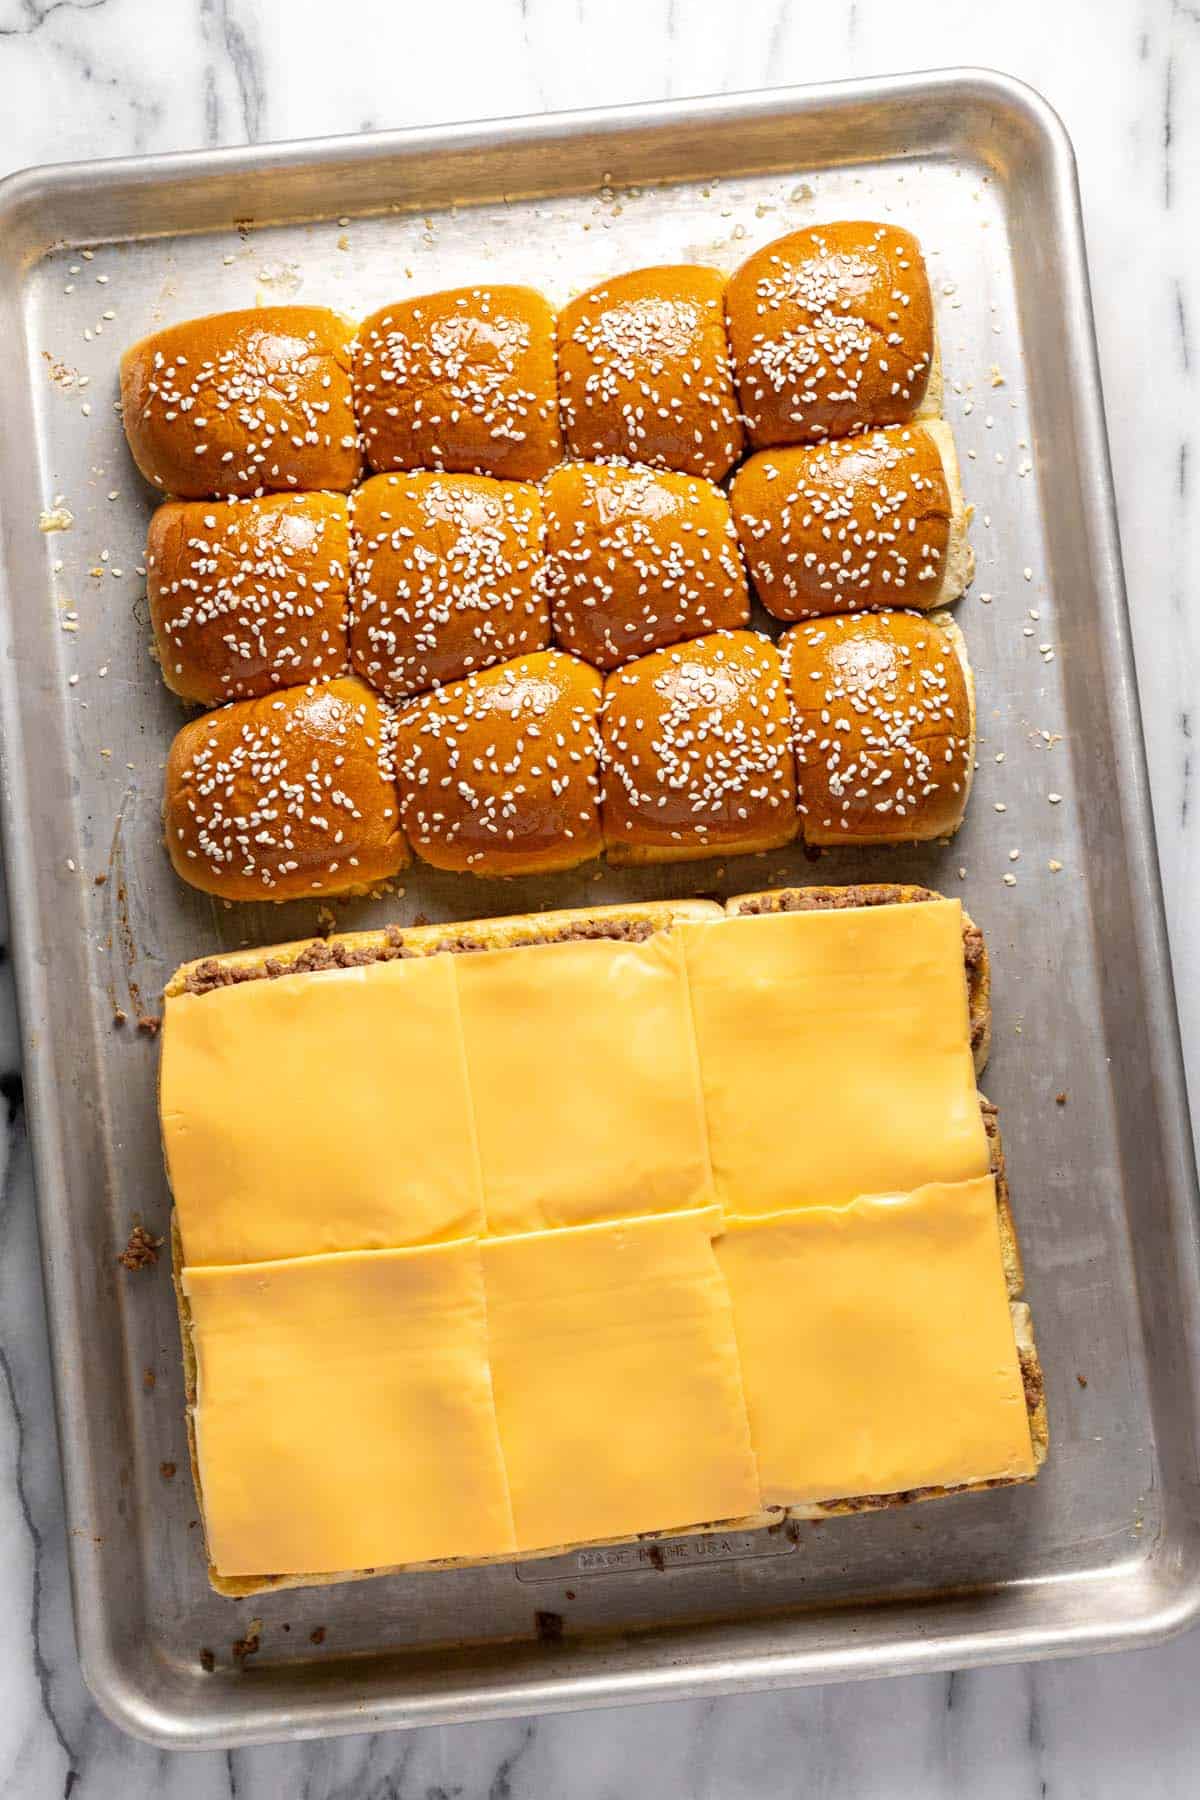 Slider buns topped with sesame seeds and slider buns topped with meat and cheese. 